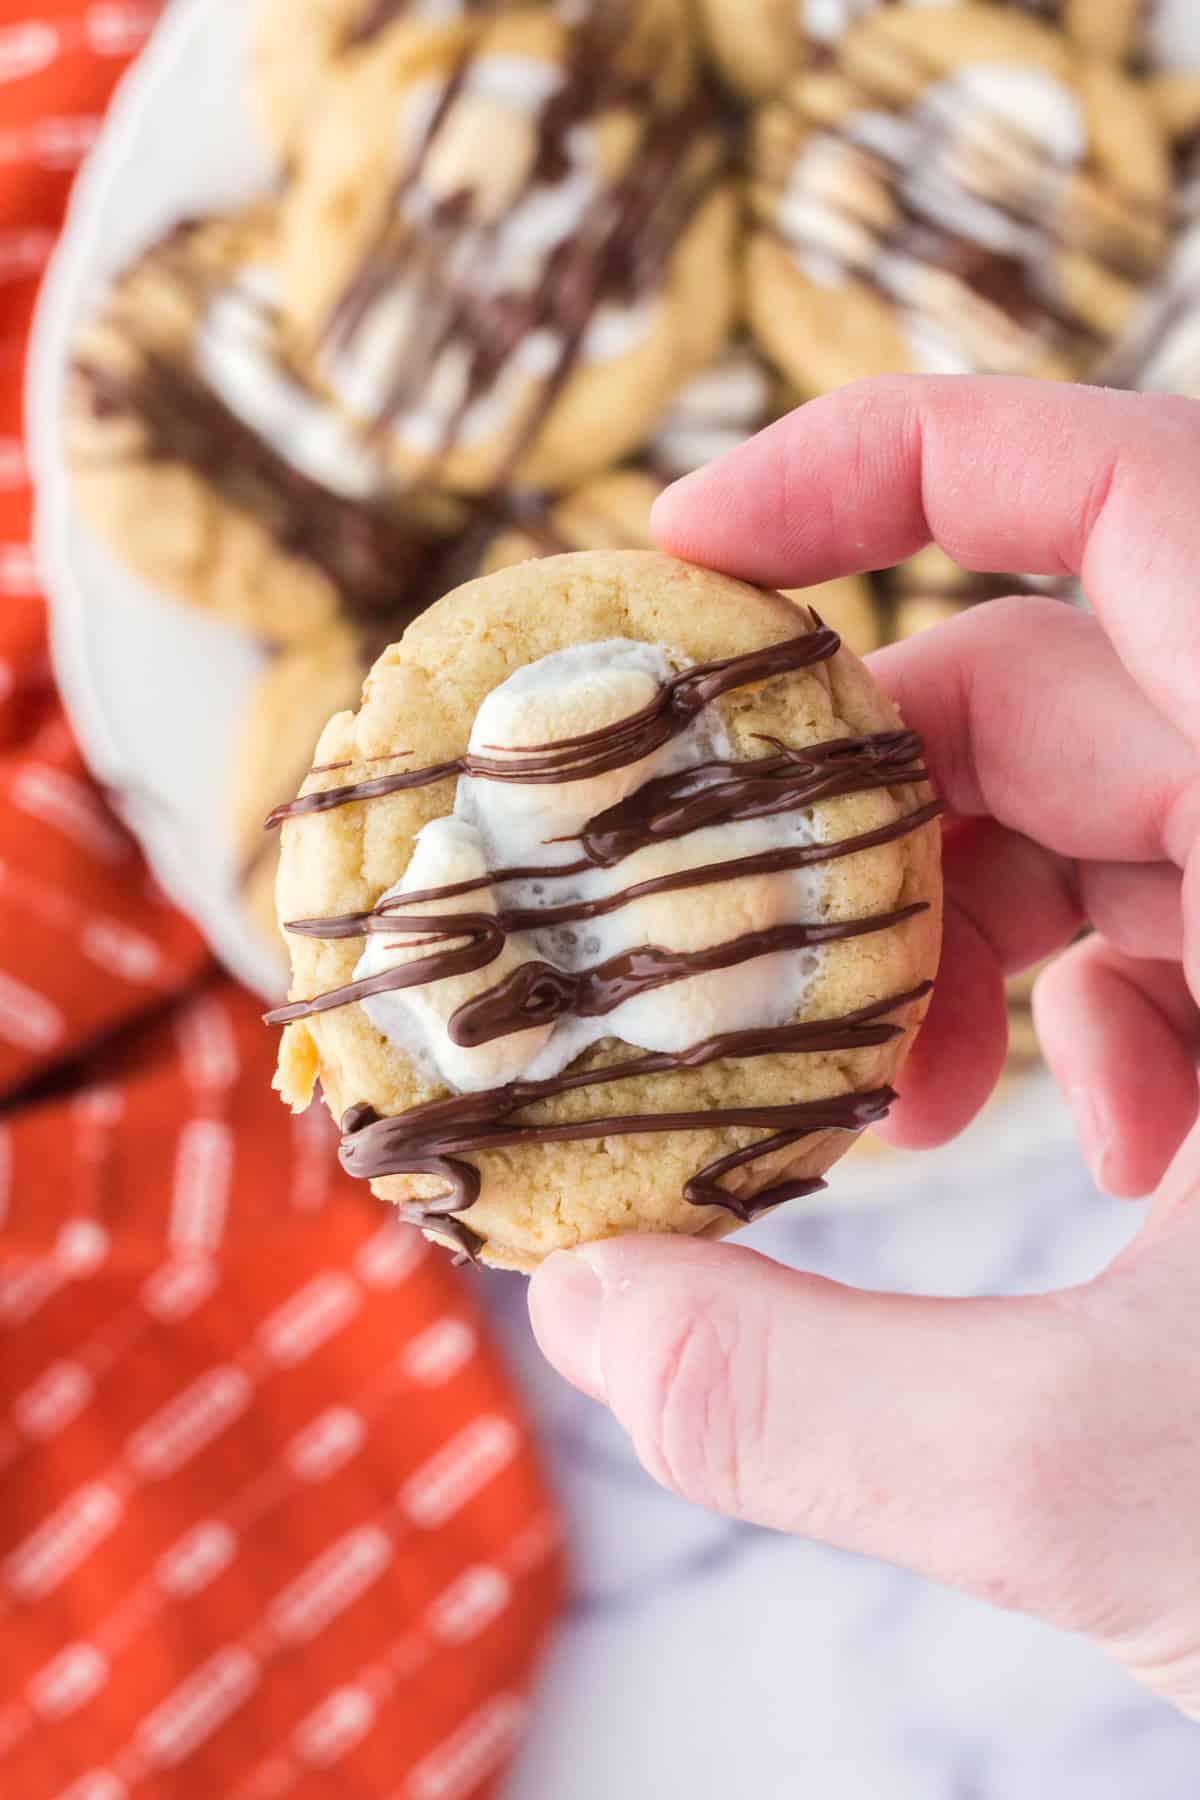 Hand holding up one finished cookie showing melted marshmallow and chocolate drizzle.